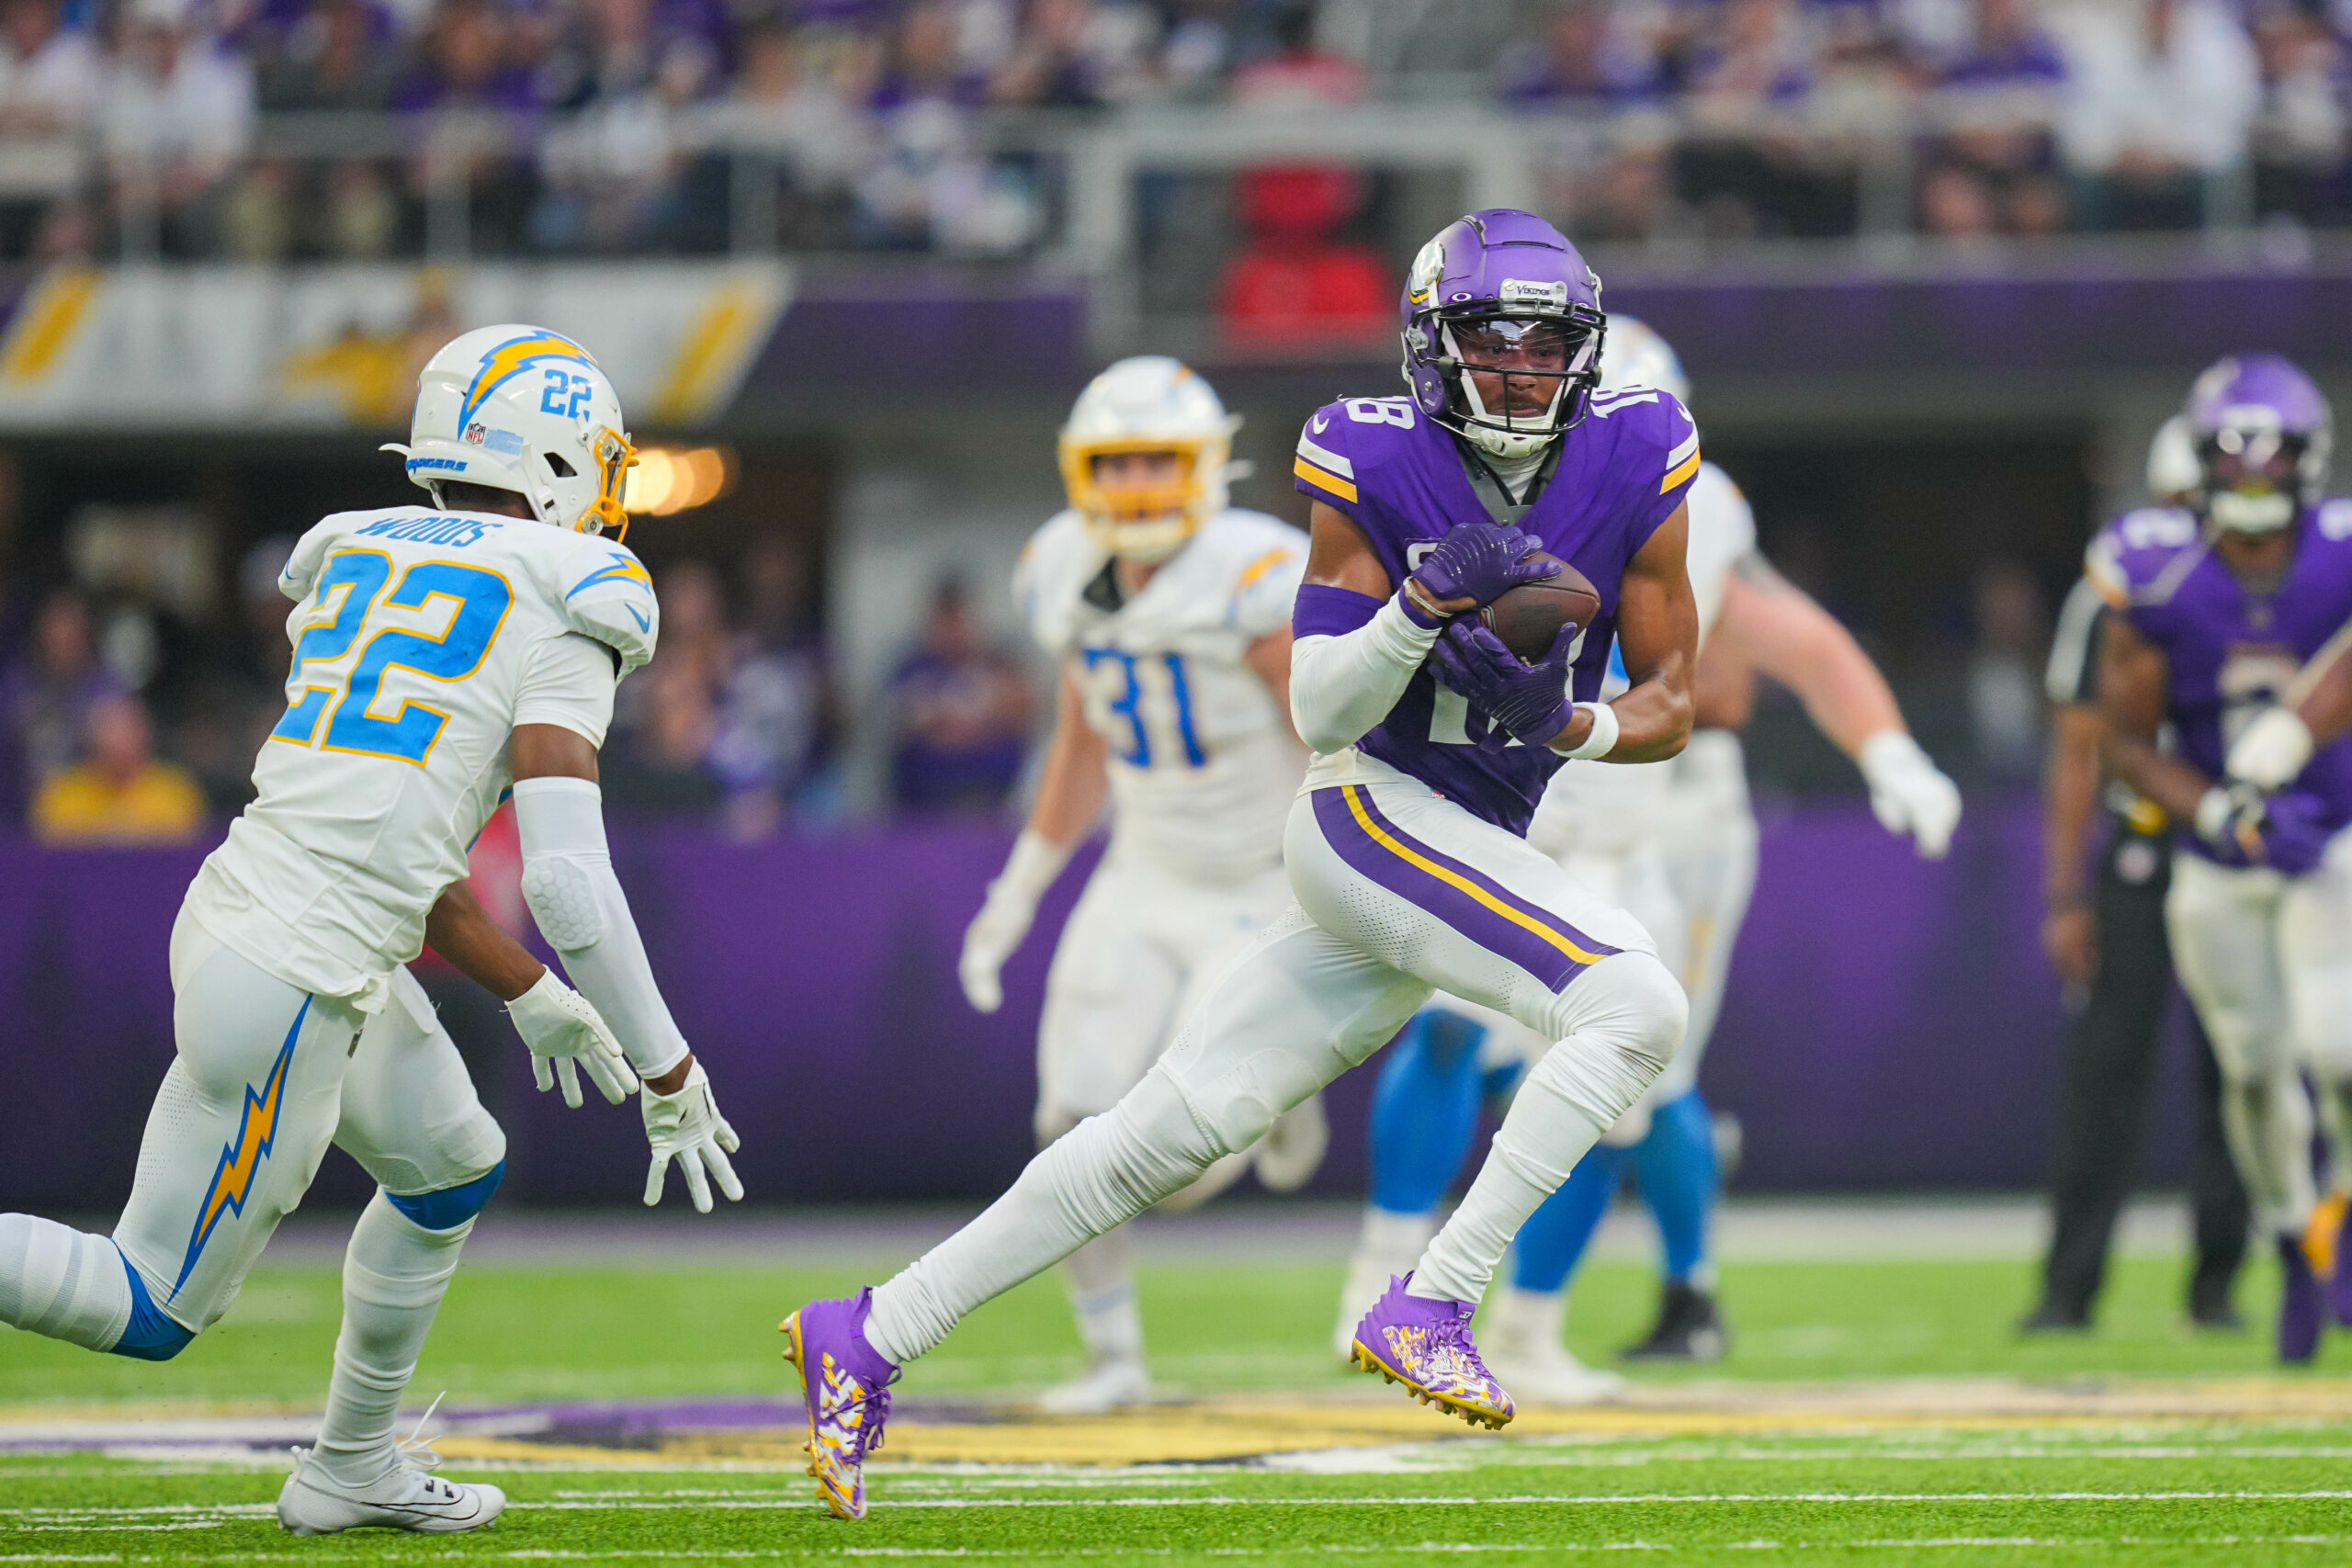 Sep 24, 2023; Minneapolis, Minnesota, USA; Minnesota Vikings wide receiver Justin Jefferson (18) runs after the catch against the Los Angeles Chargers in the fourth quarter at U.S. Bank Stadium. Mandatory Credit: Brad Rempel-USA TODAY Sports